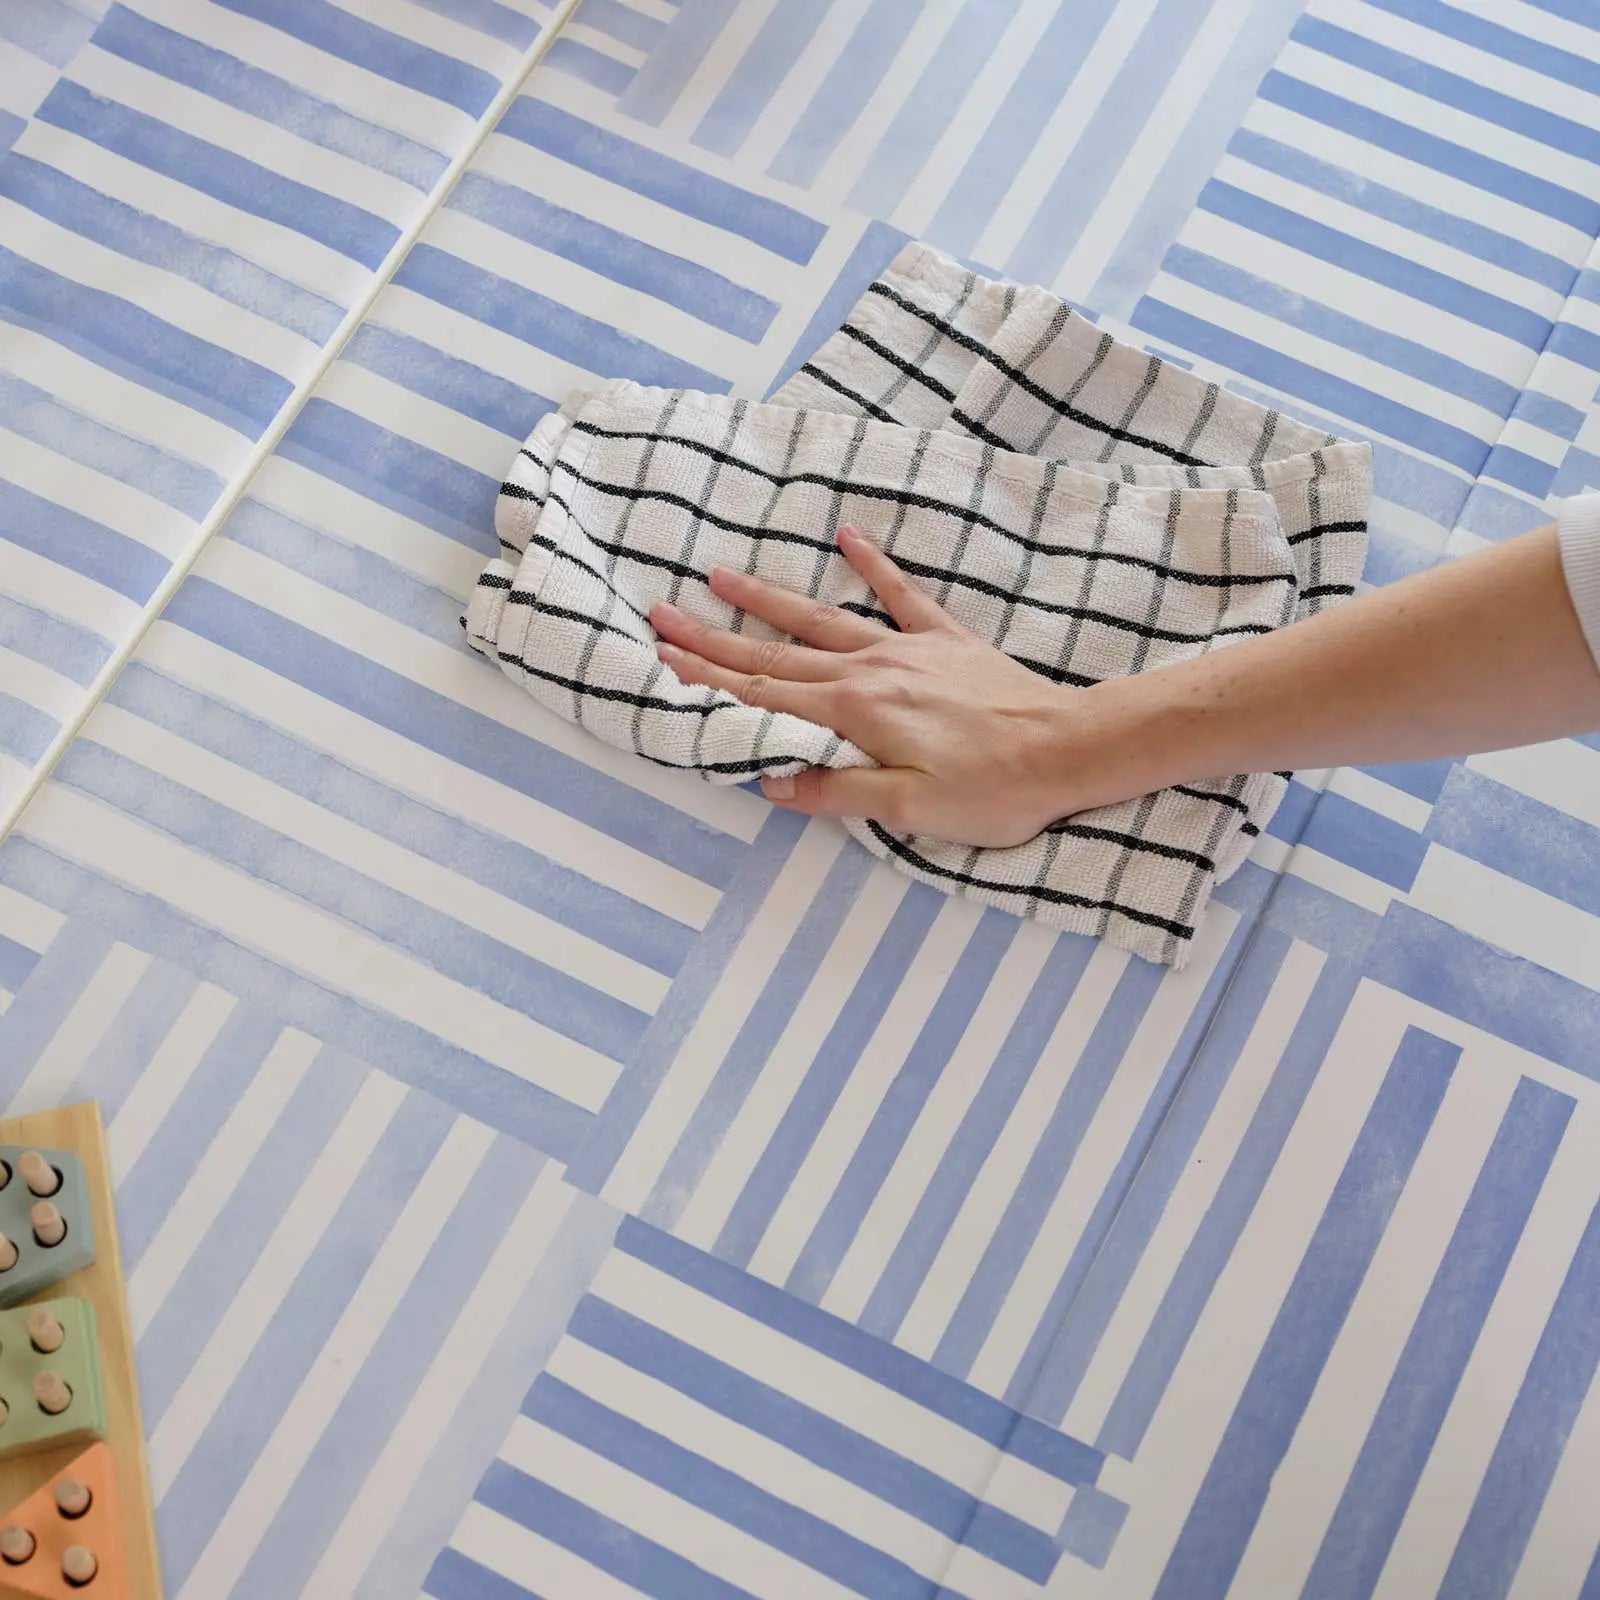 french blue inverted stripe blue and white tumbling mat. Shown with a hand wiping up a spill with a towel and a wooden toy peaking out of the lower left hand corner